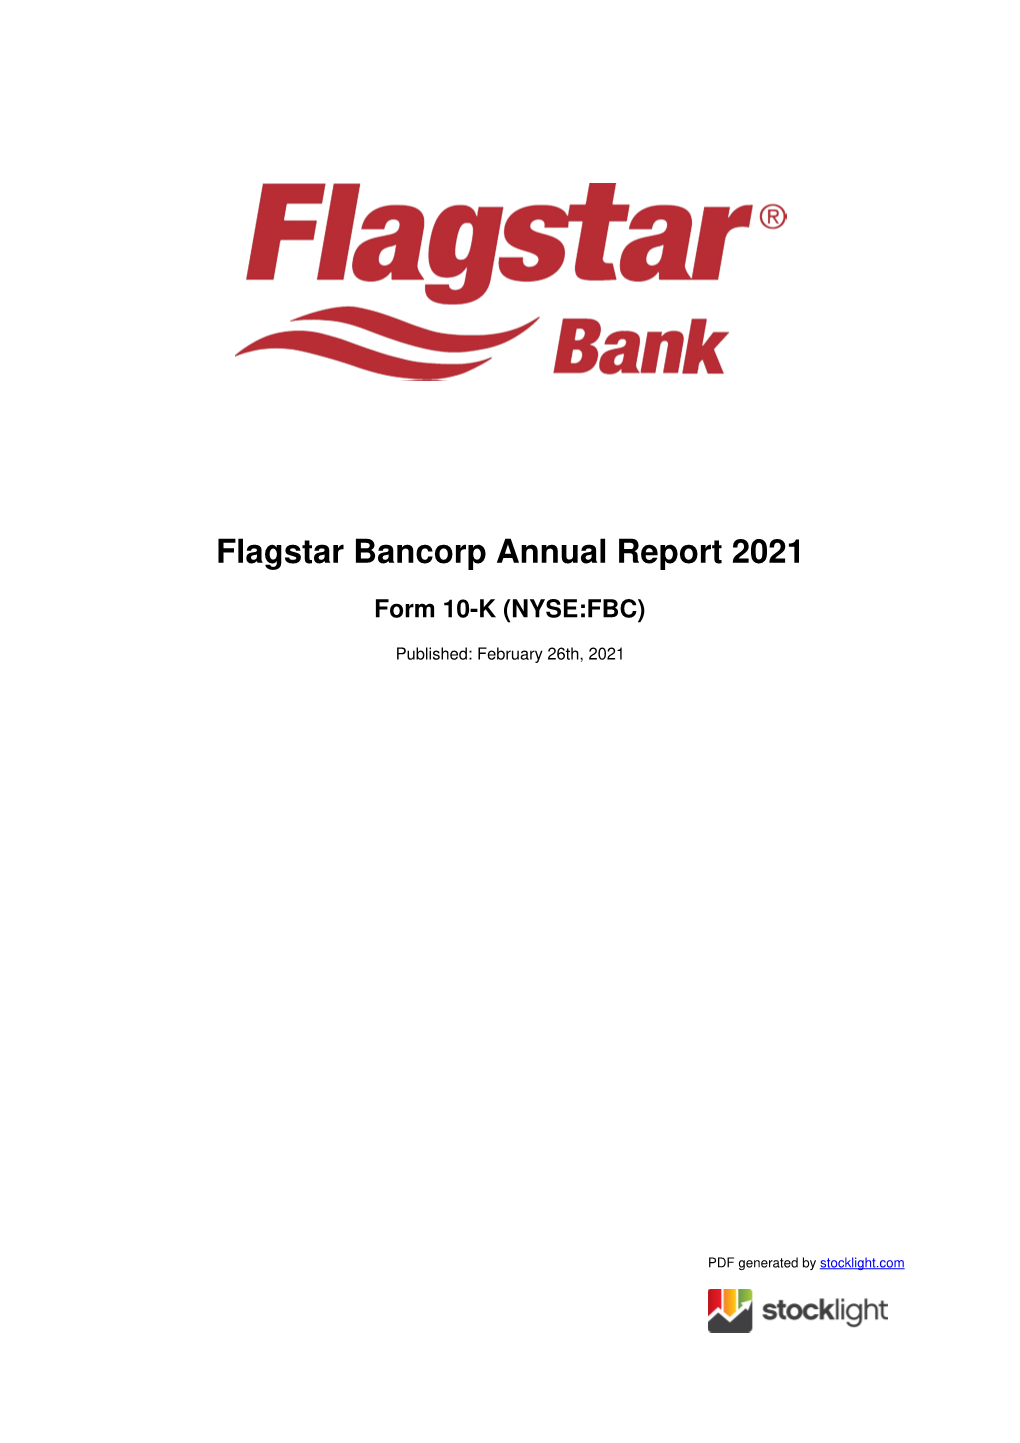 Flagstar Bancorp Annual Report 2021